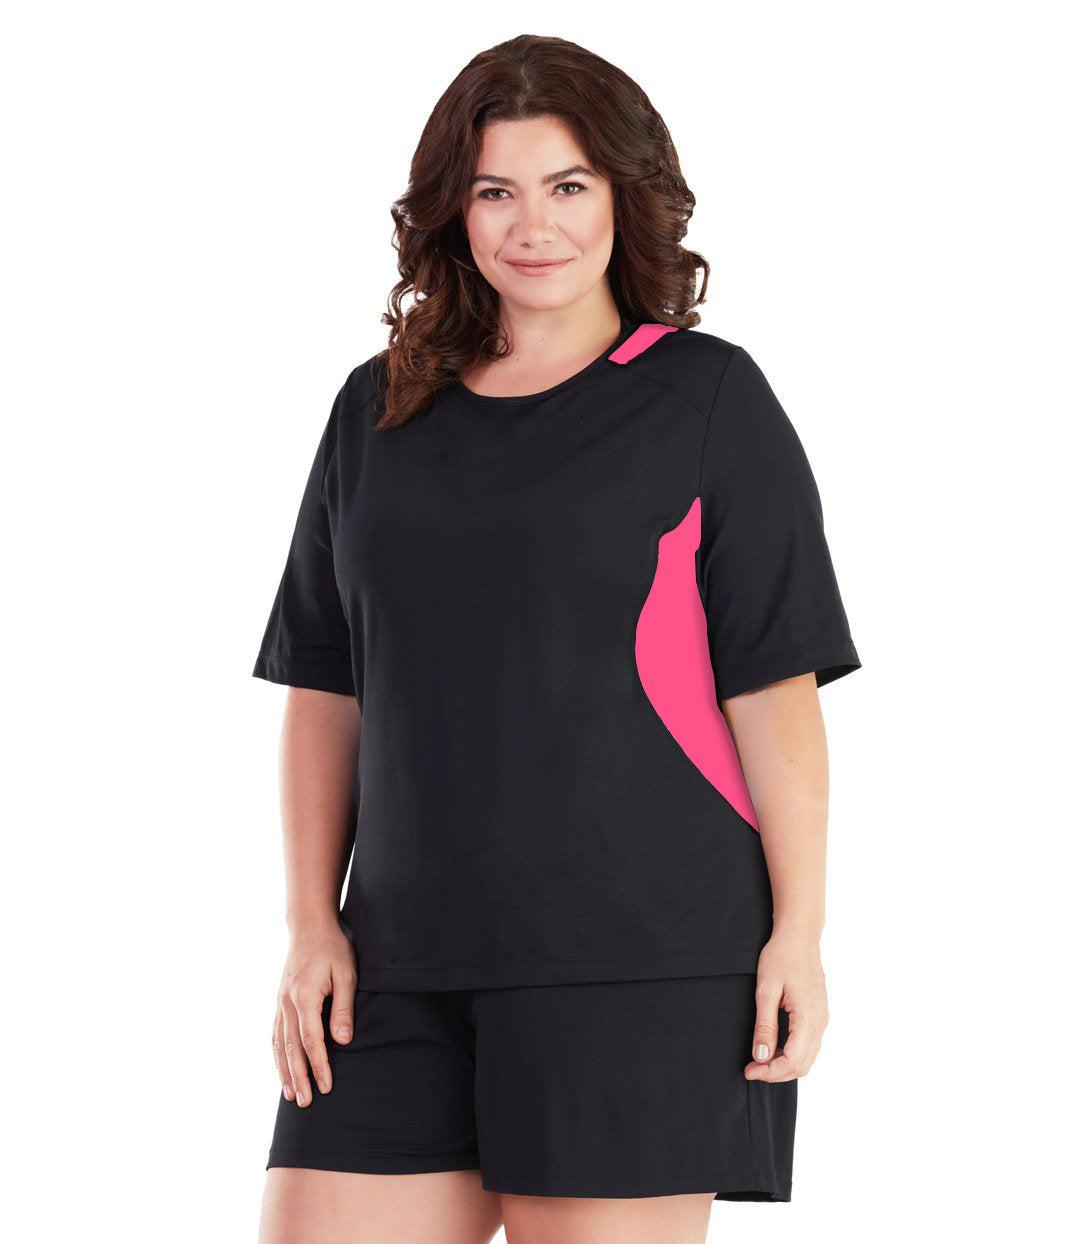 Plus size woman, facing front, wearing AquaSport Colorblock Swim Tee Pink and Black. Pink colorblocking on waist and shoulders. Long cover short sleeves meeting at the elbow and a rounded neckline. 